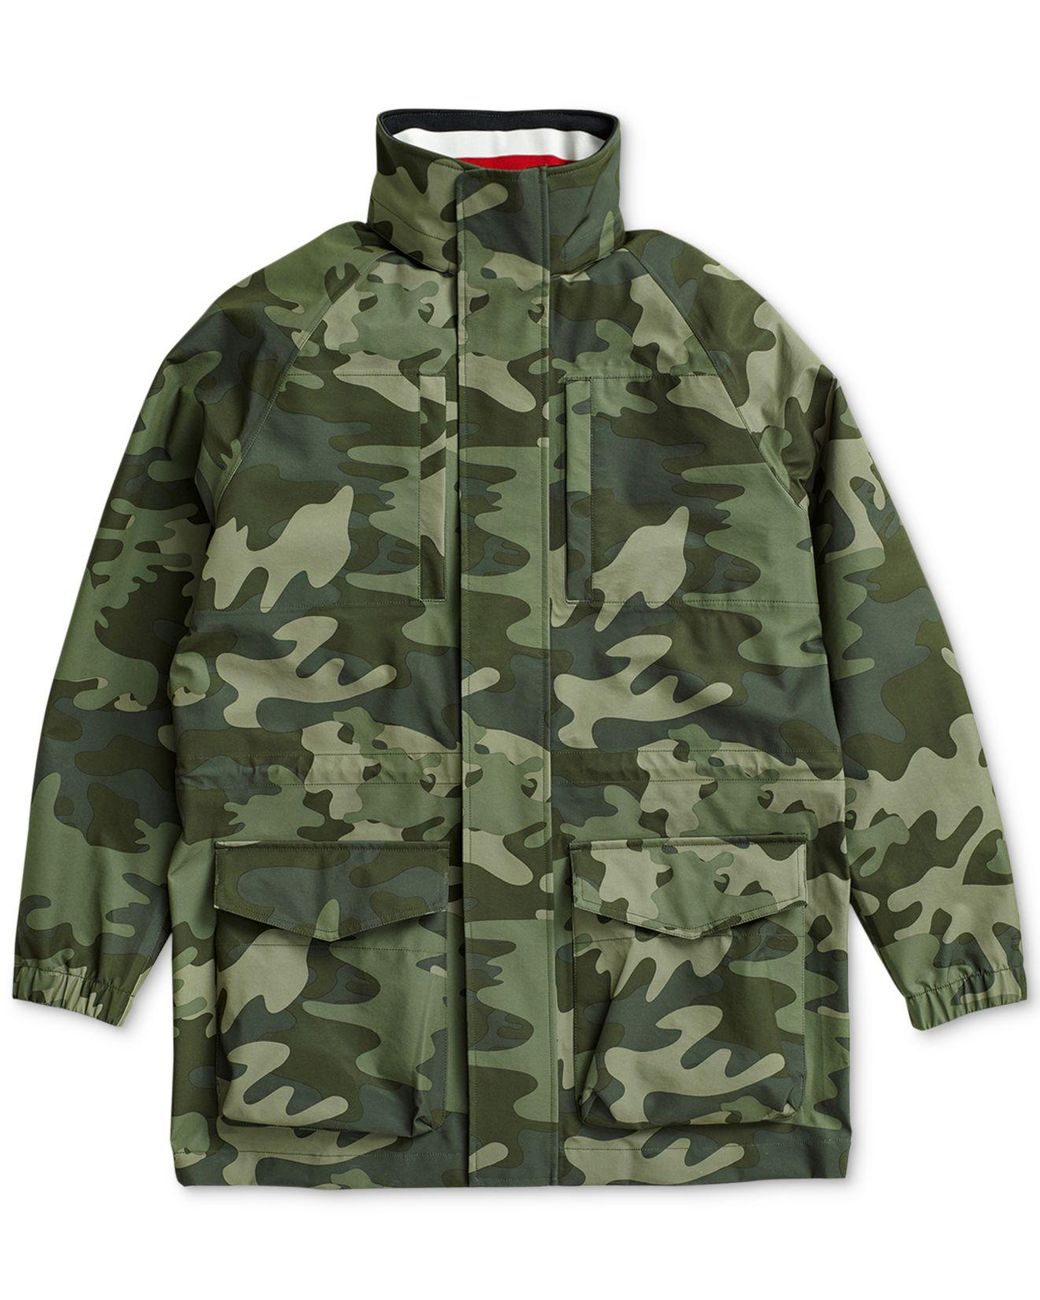 Tommy Hilfiger Camo Jacket With Magnetic Closure in Green for Men - Lyst